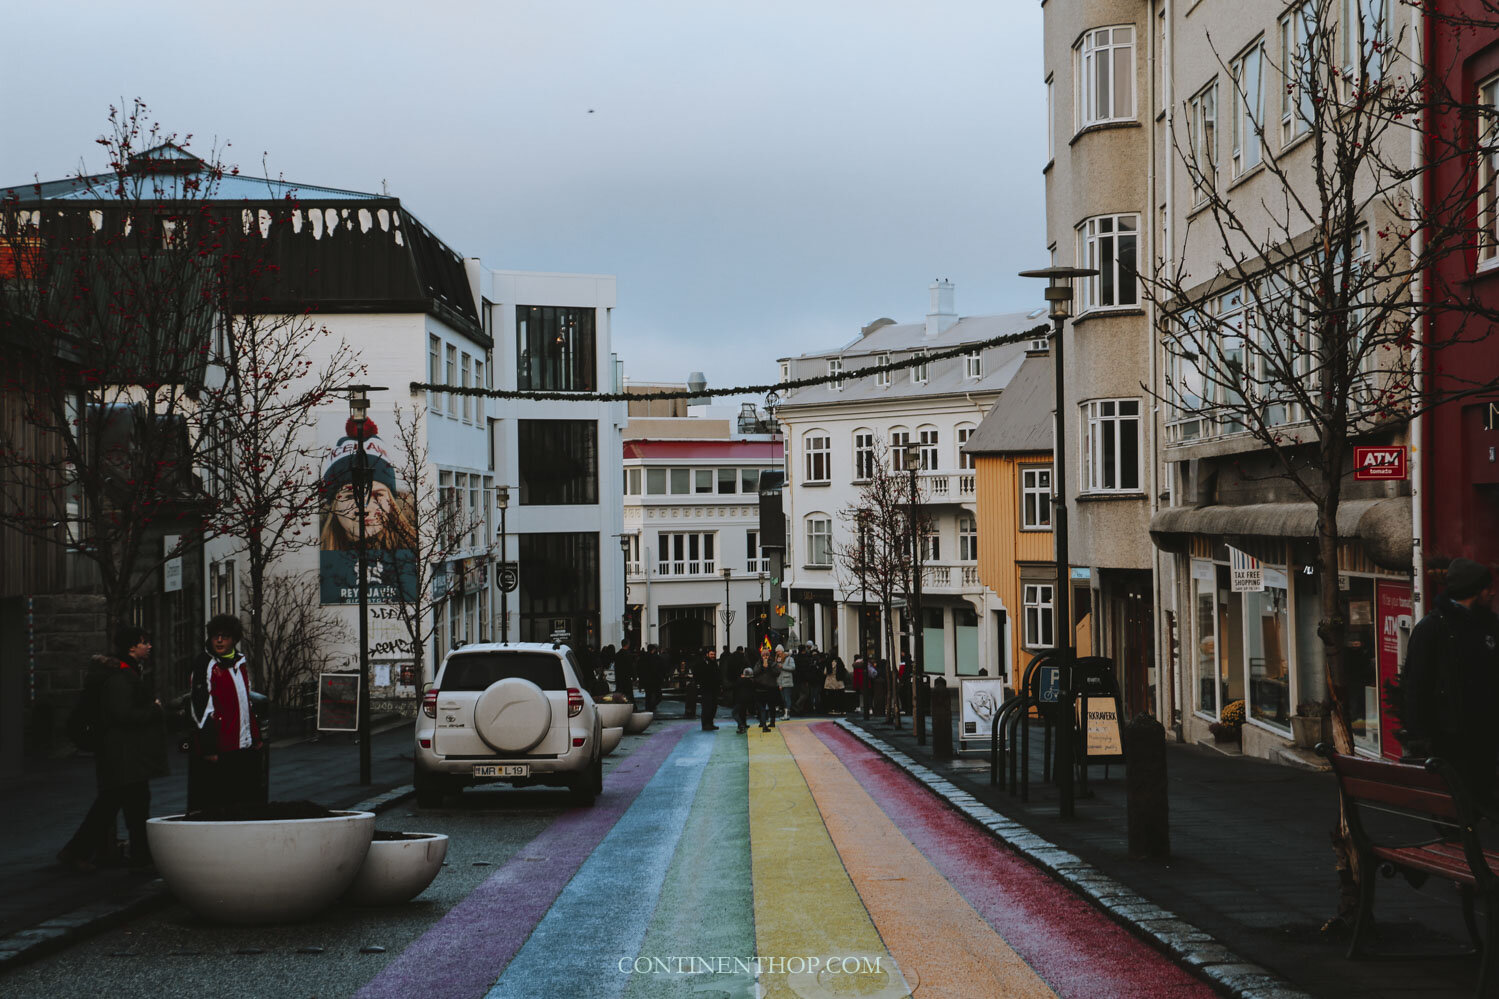 Rainbow street in Reykjavik as seen on an Iceland 6 day itinerary